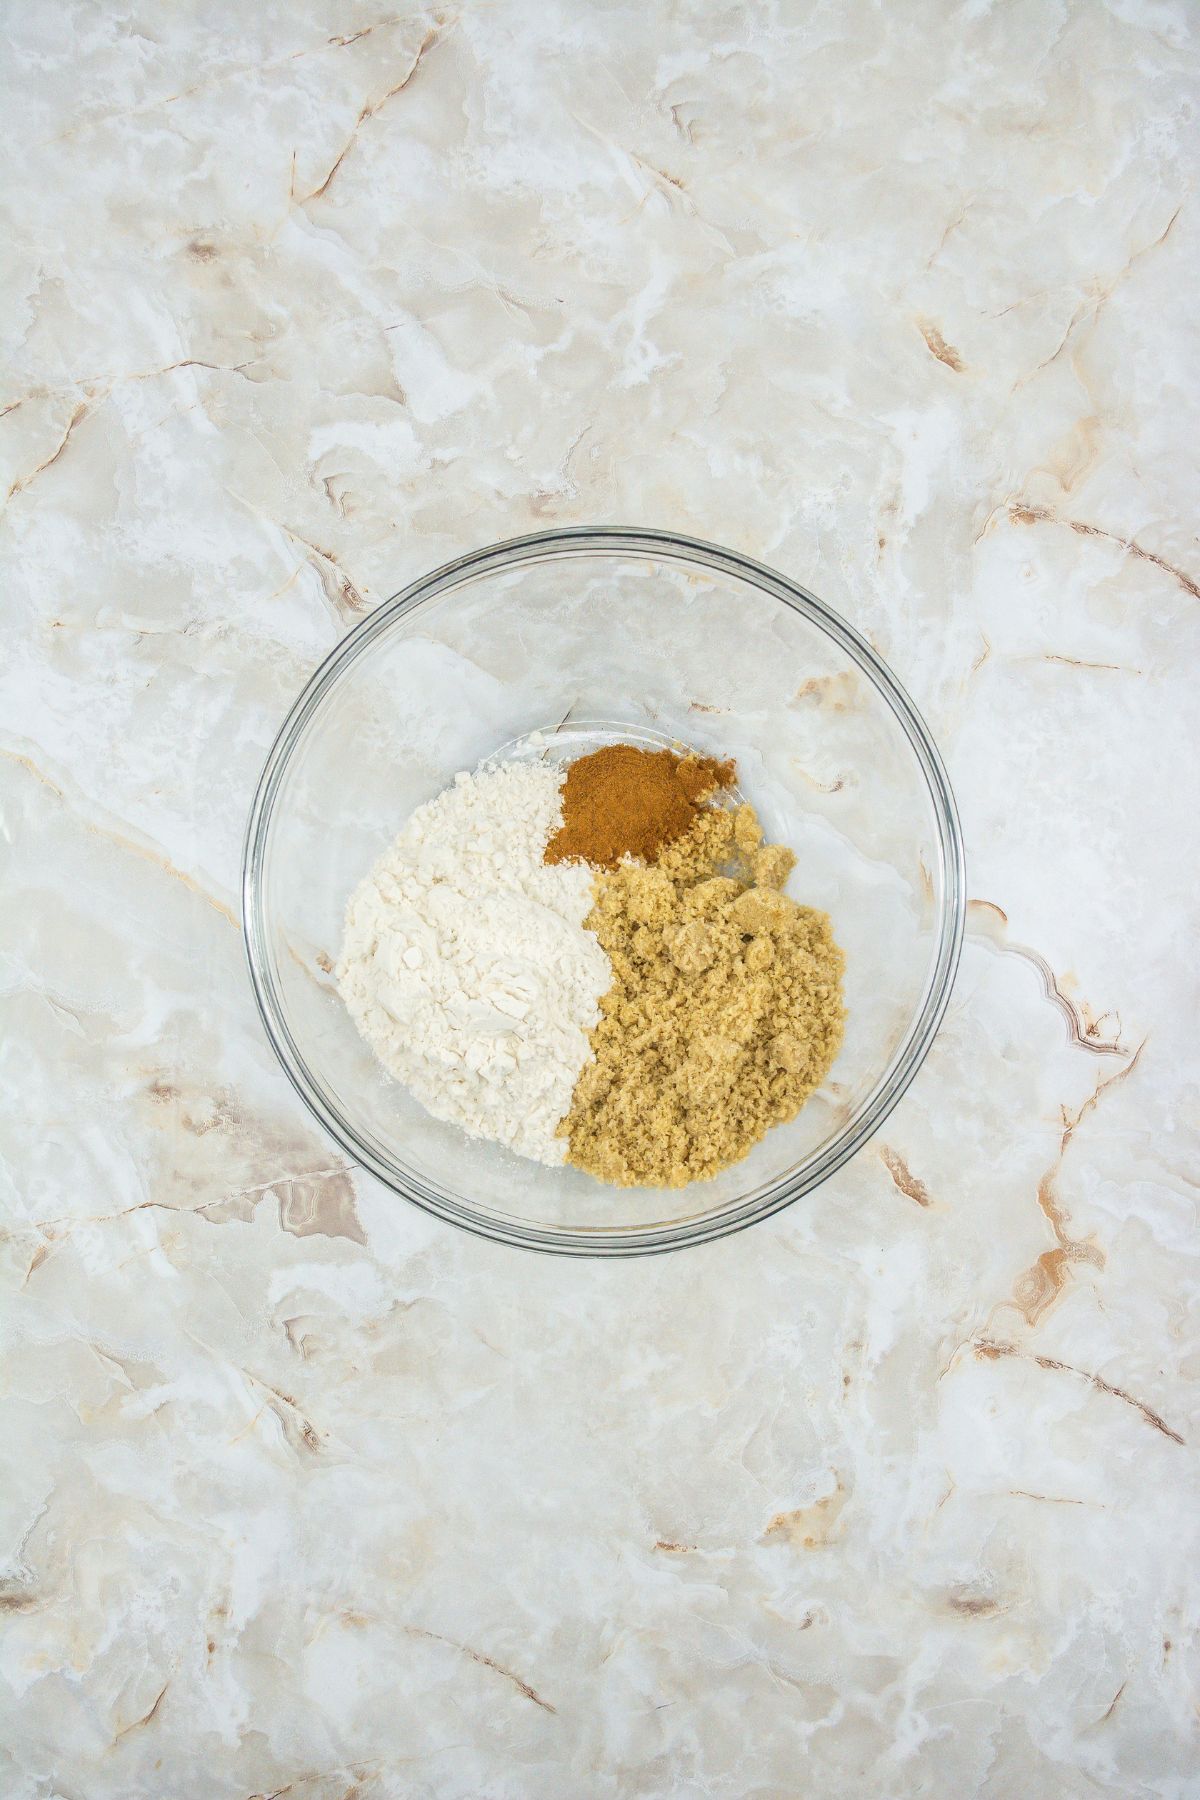 Dry ingredients for crunch topping in a mixing bowl.